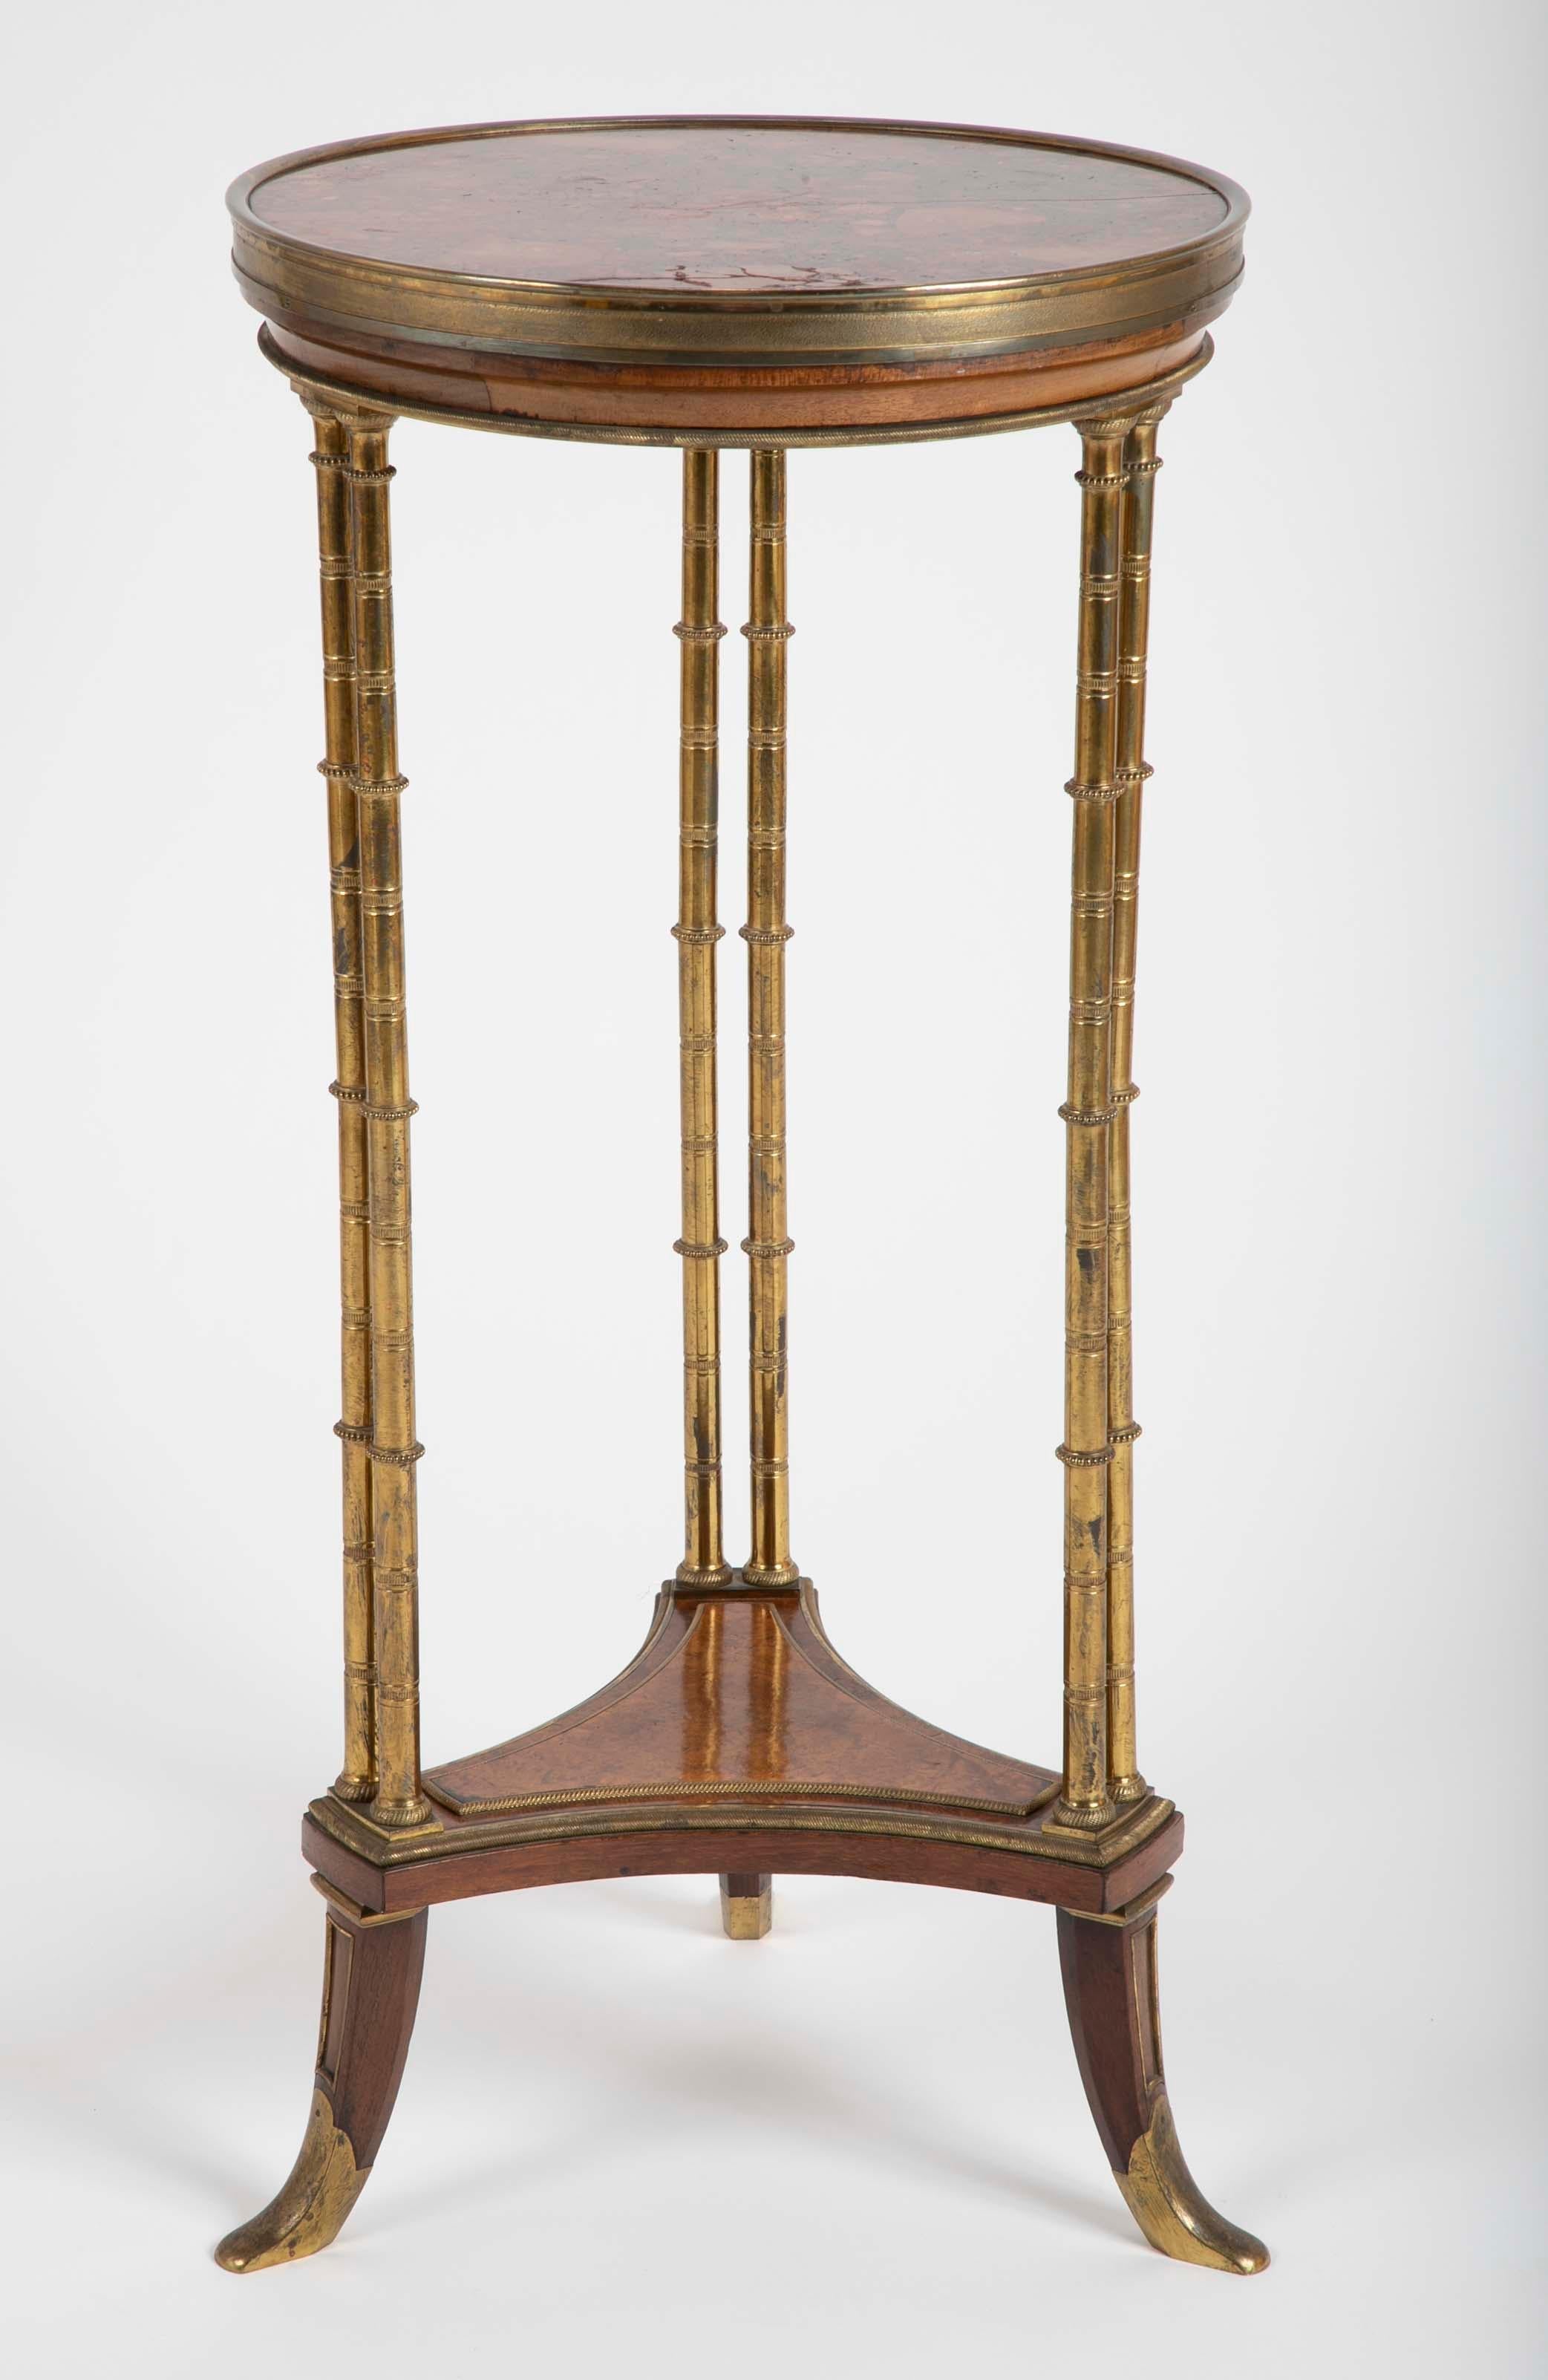 French gilt bronze mounted Amboyna burr and mahogany Louis XVI style guéridon after the model by Weisweiler (1750-1810) with Brocatelle marble top, circa 1880.
Similar example in many prestigious collections.
  